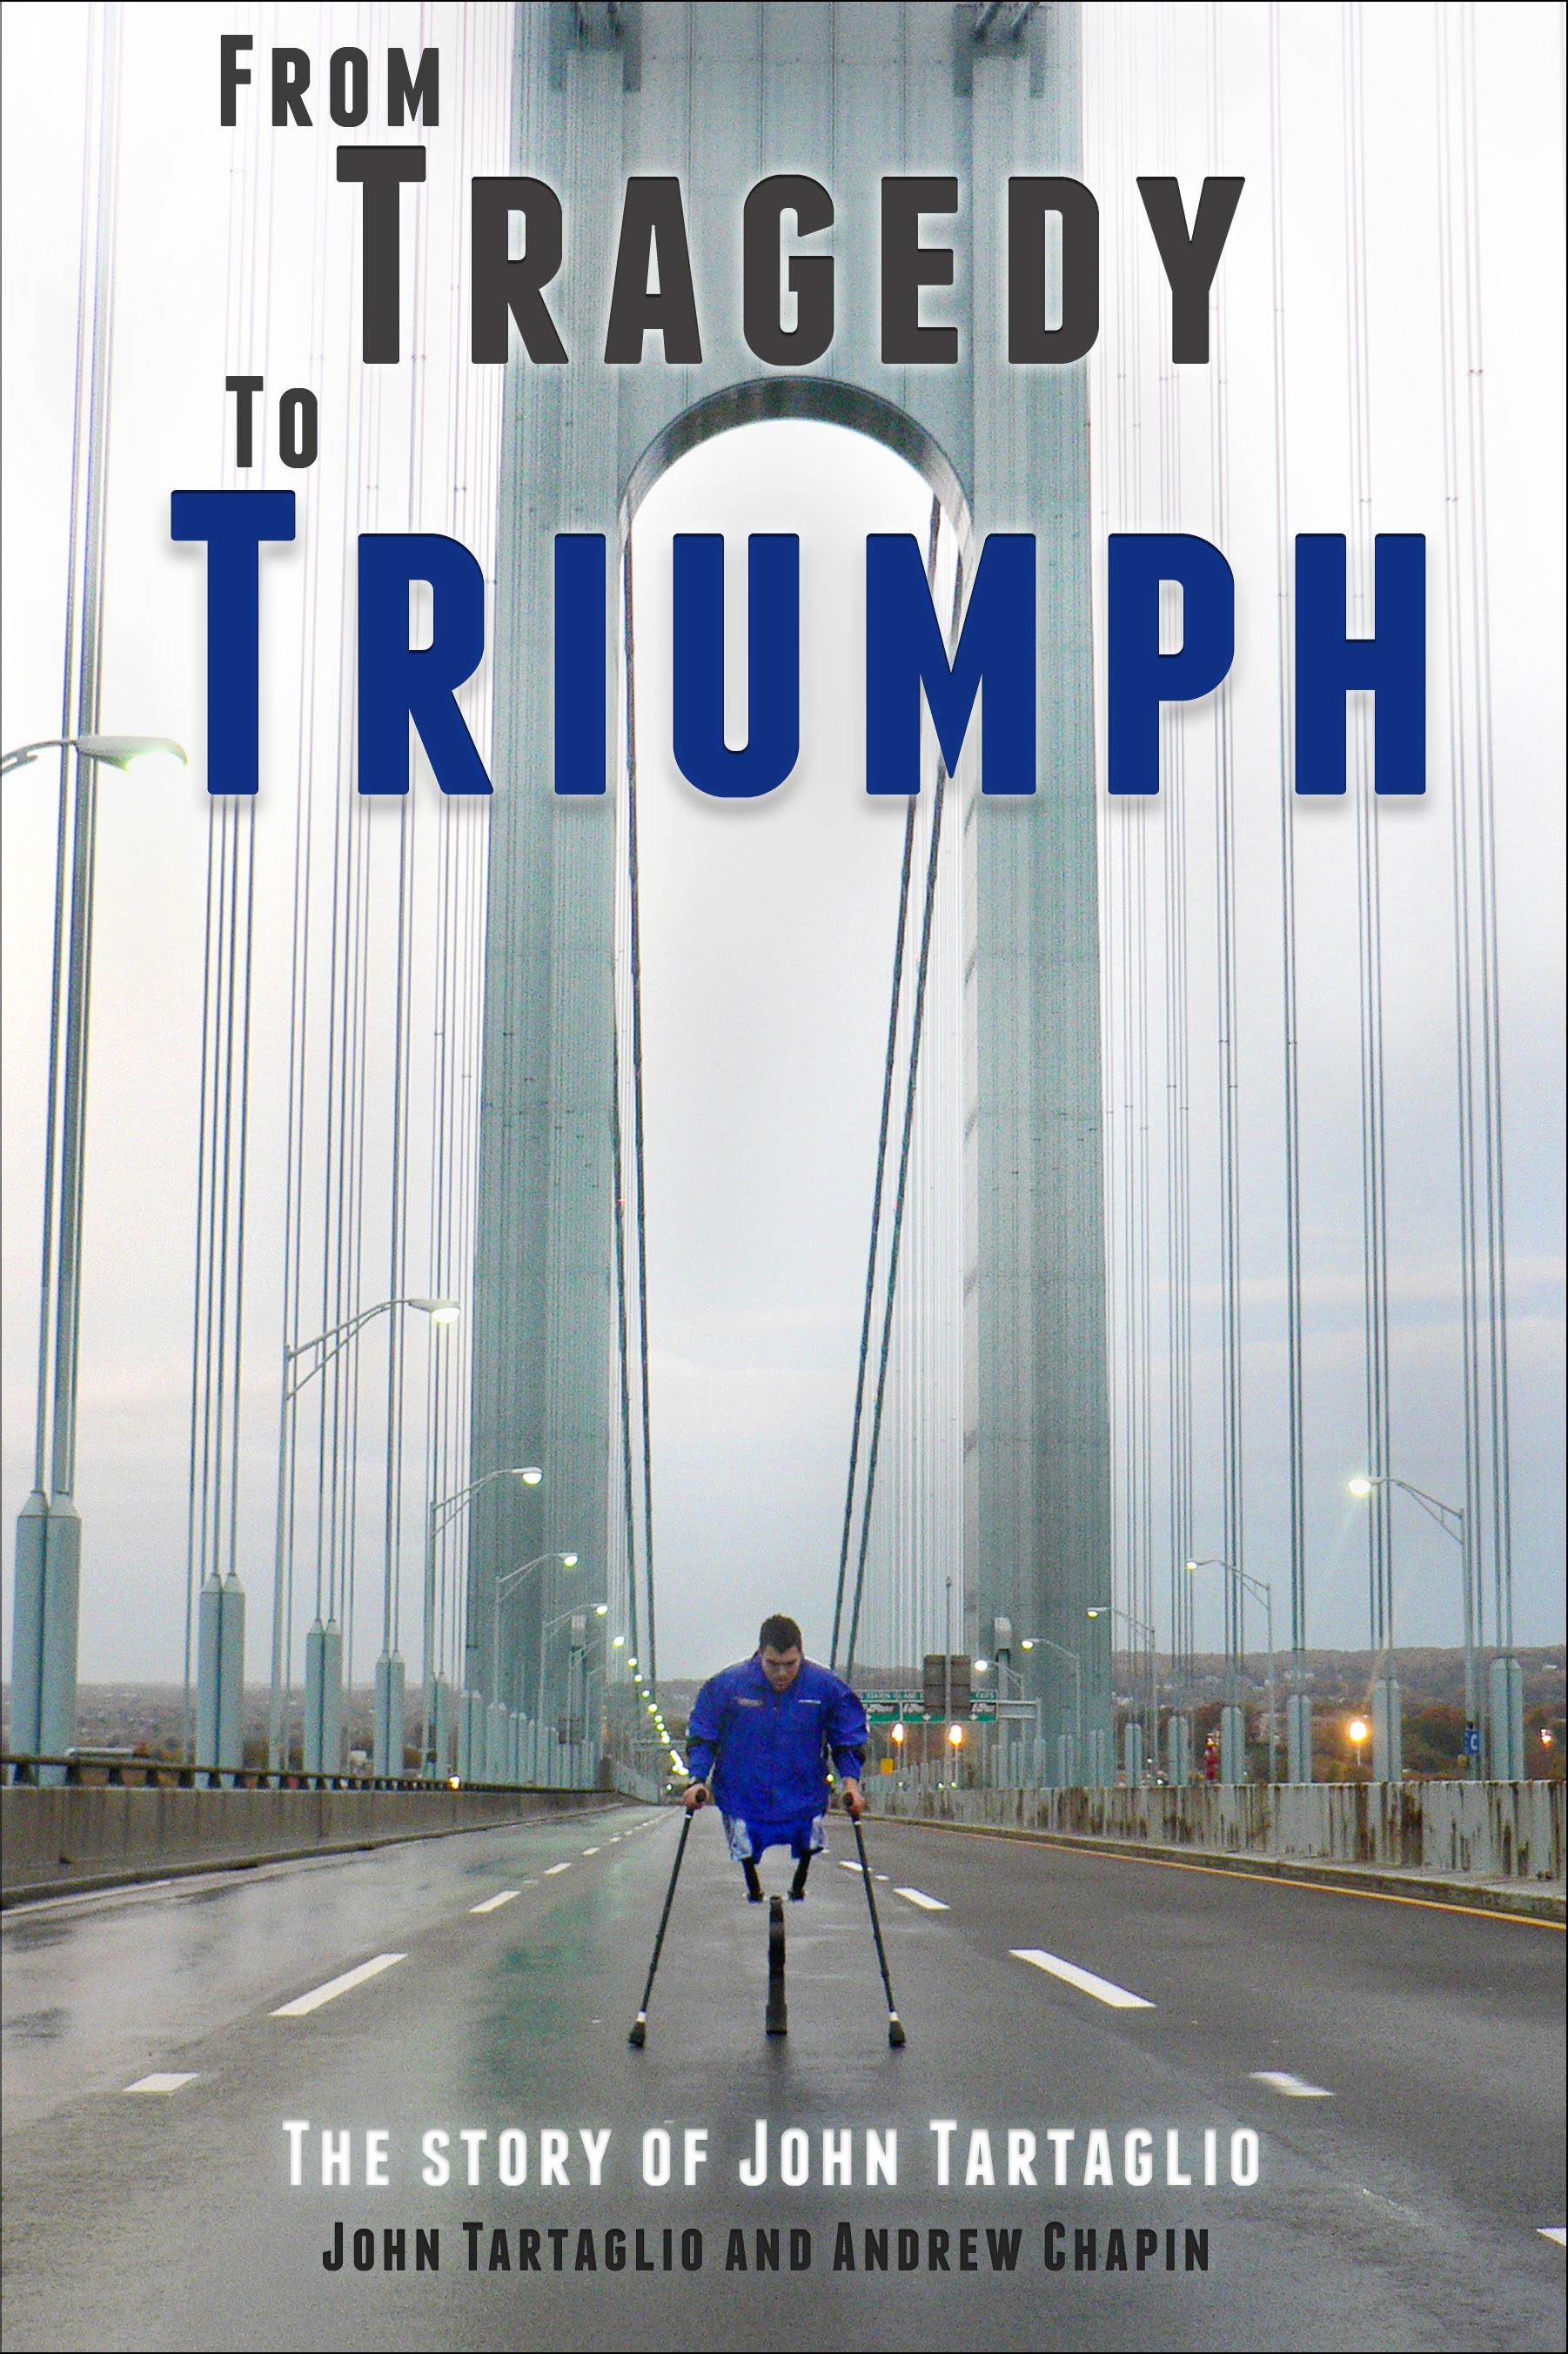 FROM TRAGEDY TO TRIUMPH COVER